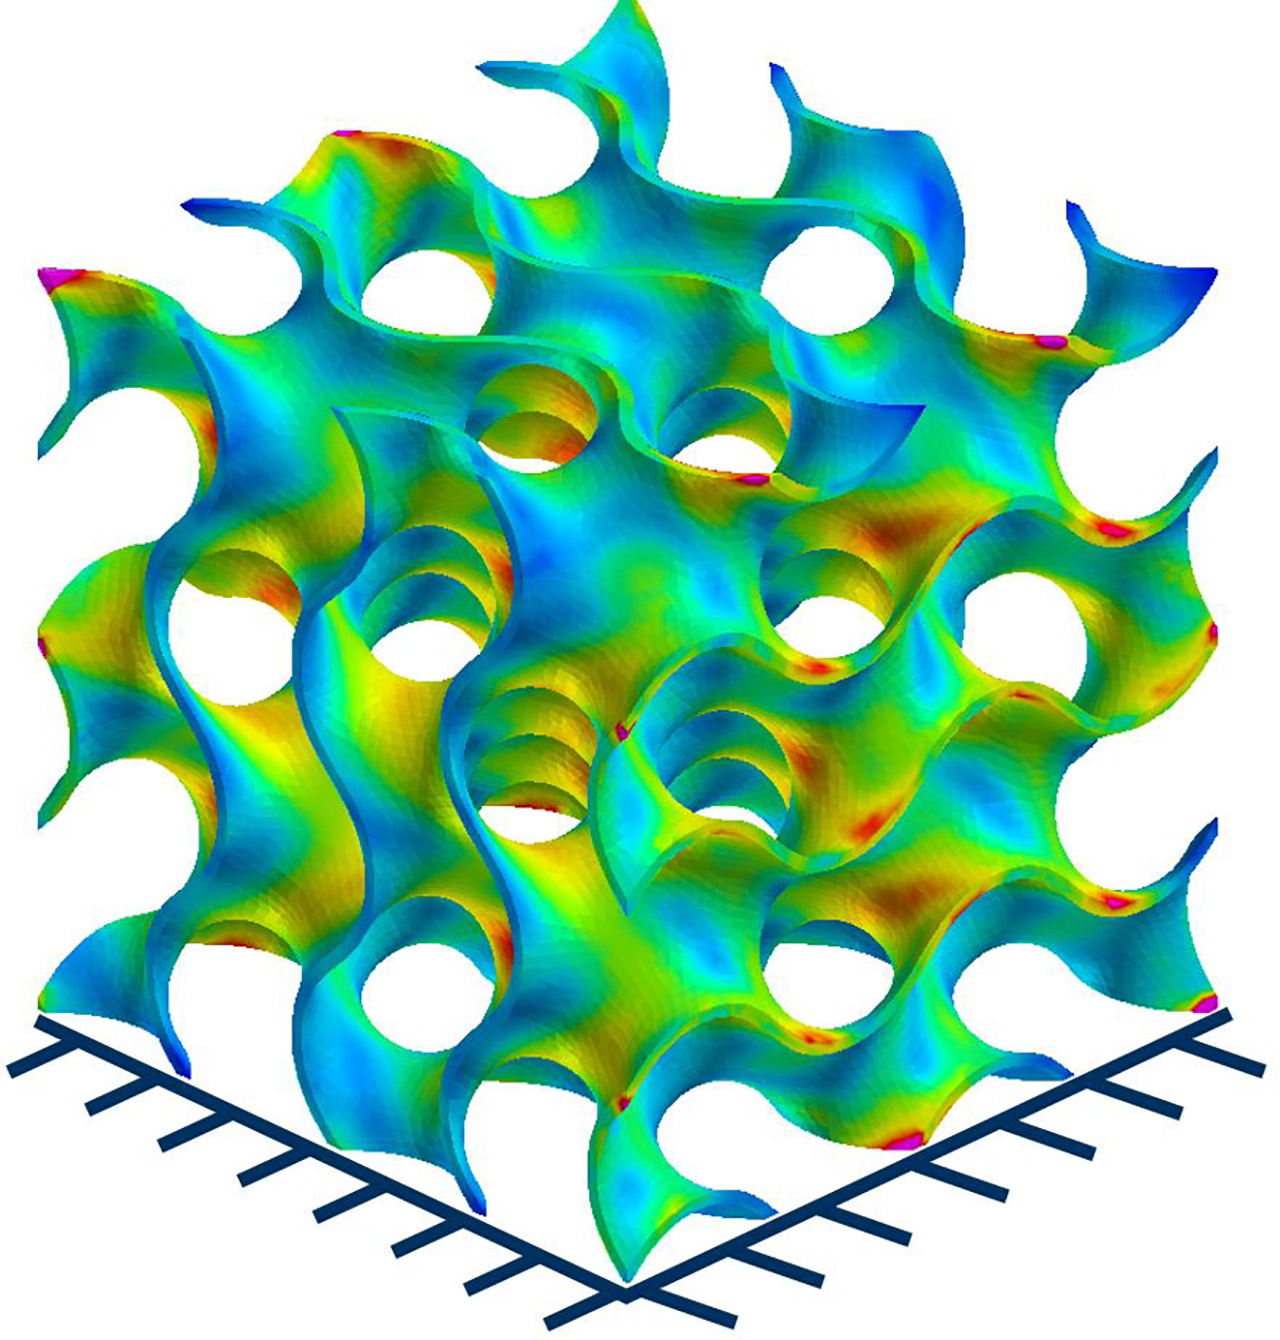 Simulations enable the optimal design of scaffold structures Stress distribution of a compression-loaded TPMS scaffold structure (Schoen Gyroid Shell 2 x 2 x 2 cell arrangement).